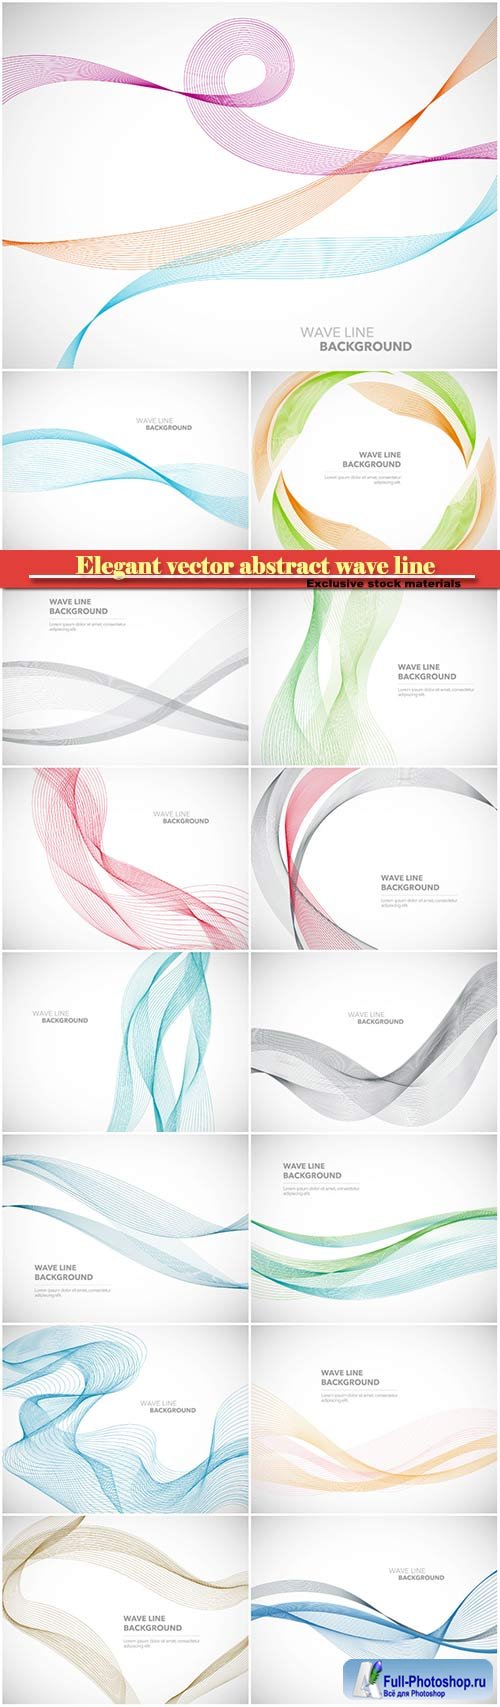 Elegant vector abstract wave line futuristic style background template